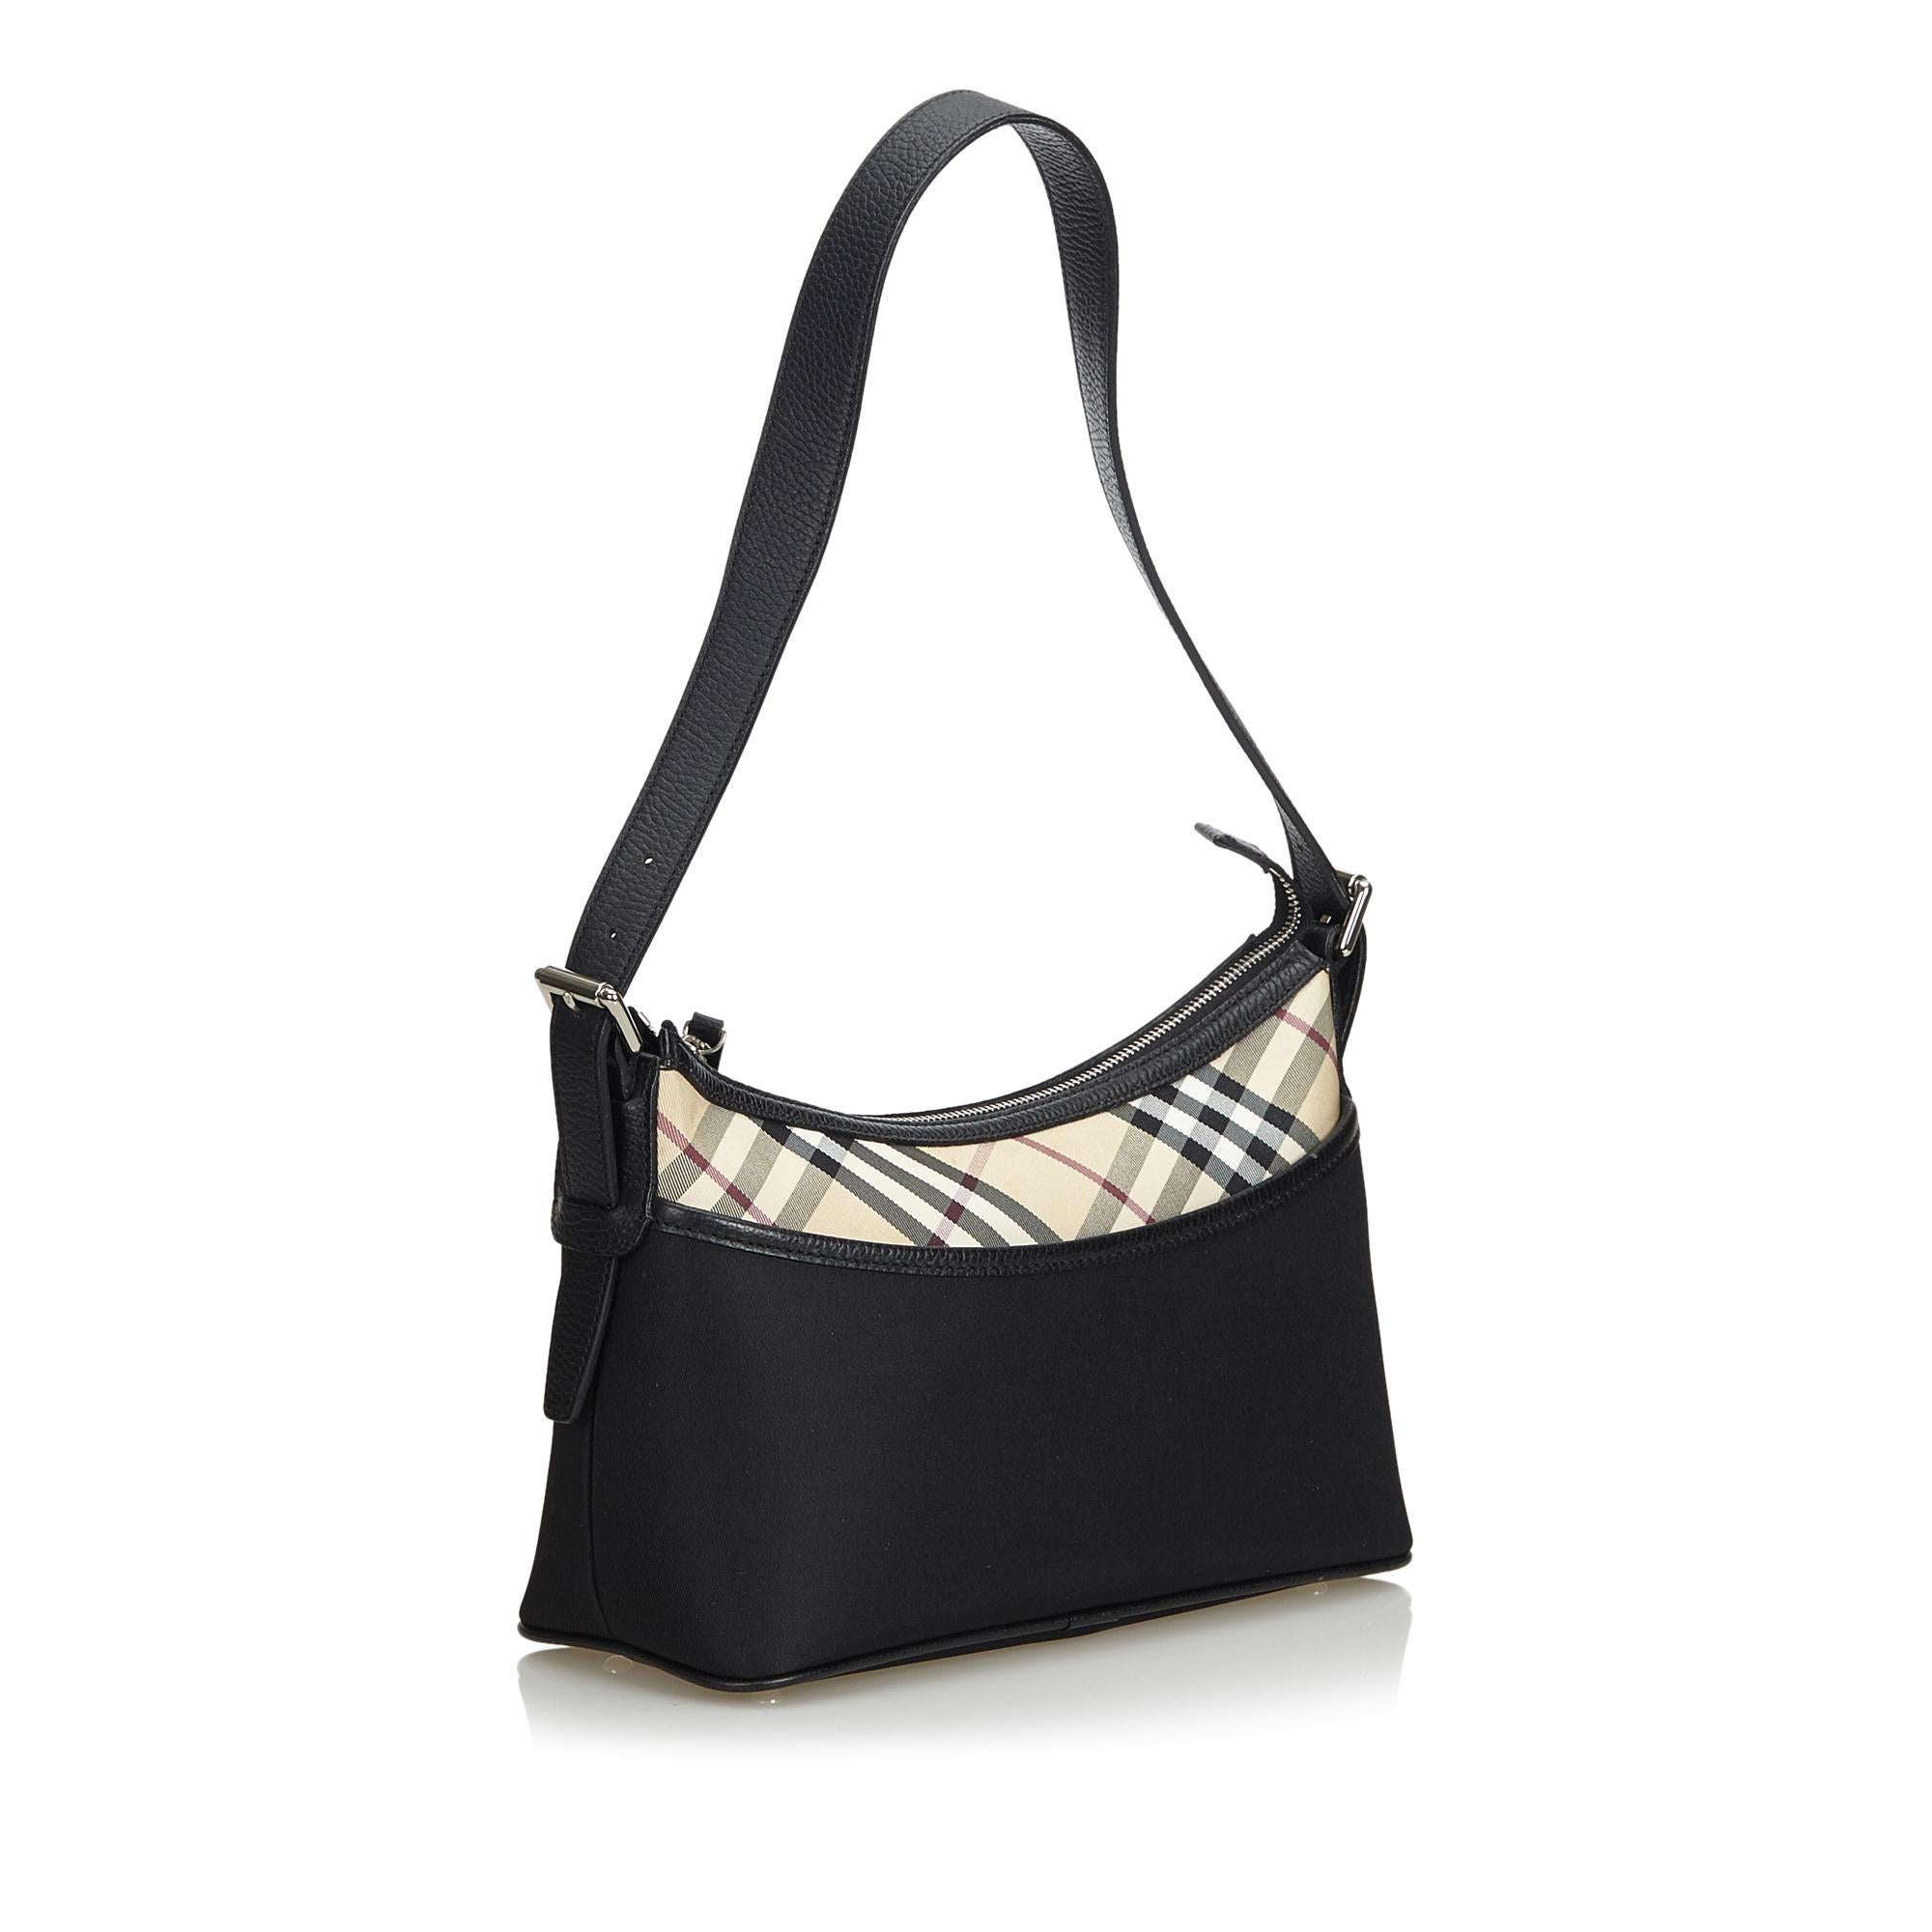 This shoulder bag features a nylon body with a nova check panel and leather trim, a front exterior slip pocket, an adjustable flat leather strap, a top zip closure, and interior zip and slip pockets. It carries as AB condition rating.

Inclusions: